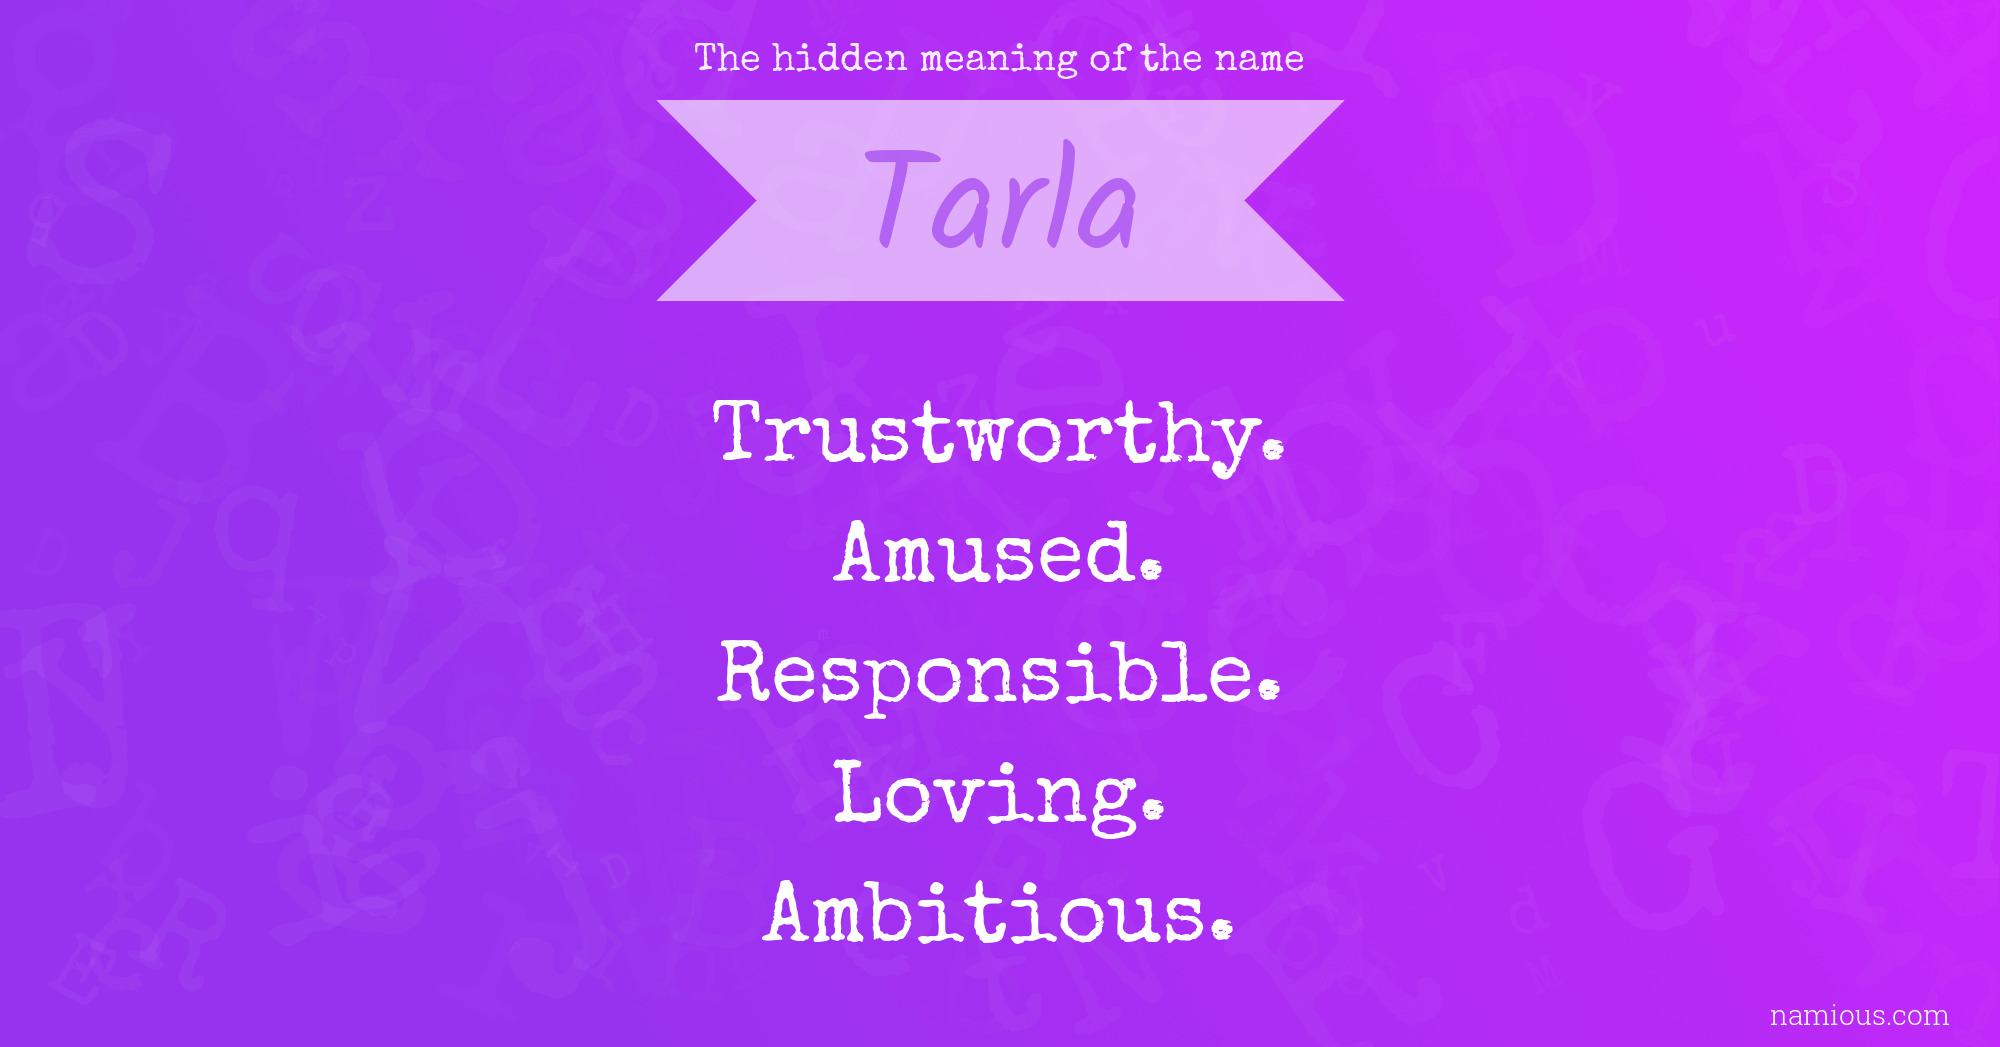 The hidden meaning of the name Tarla